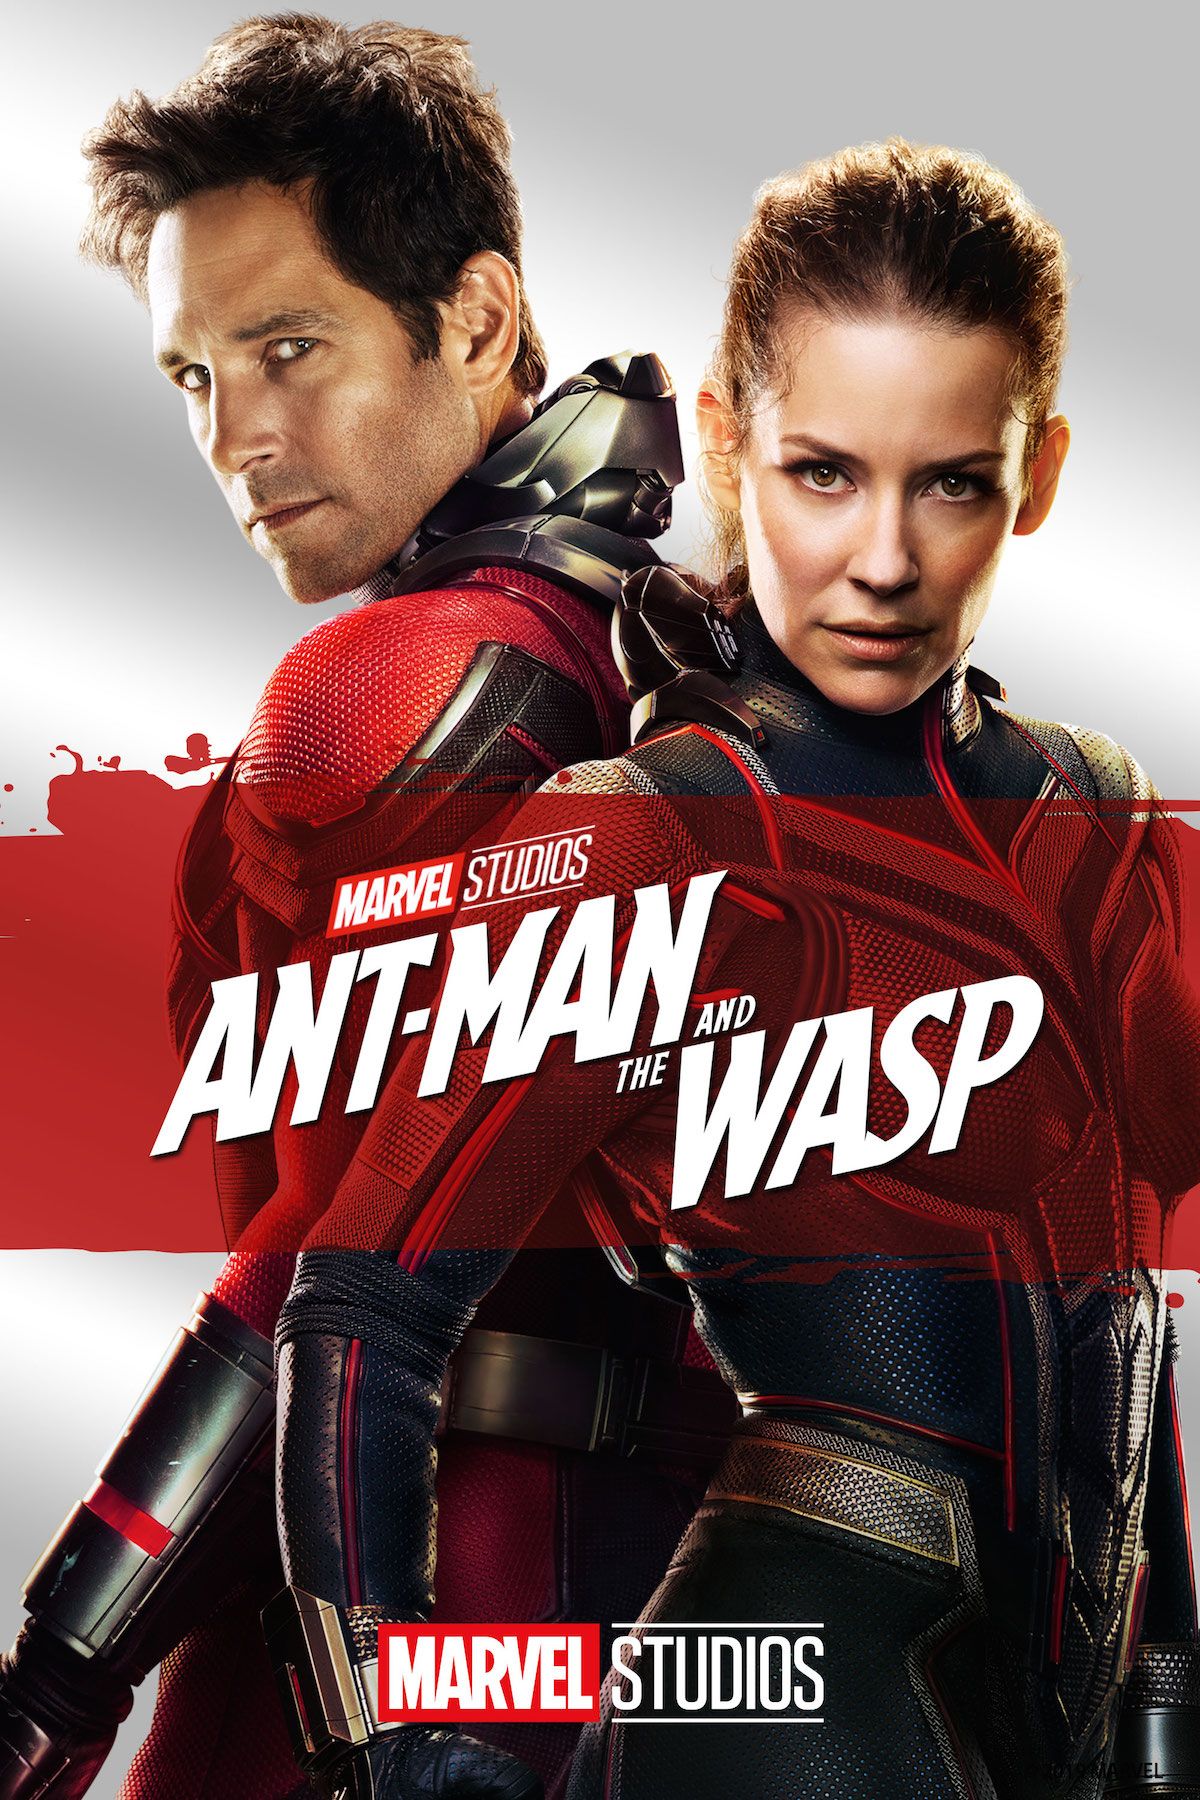 Ant man full movie dubbed in hindi watch online free